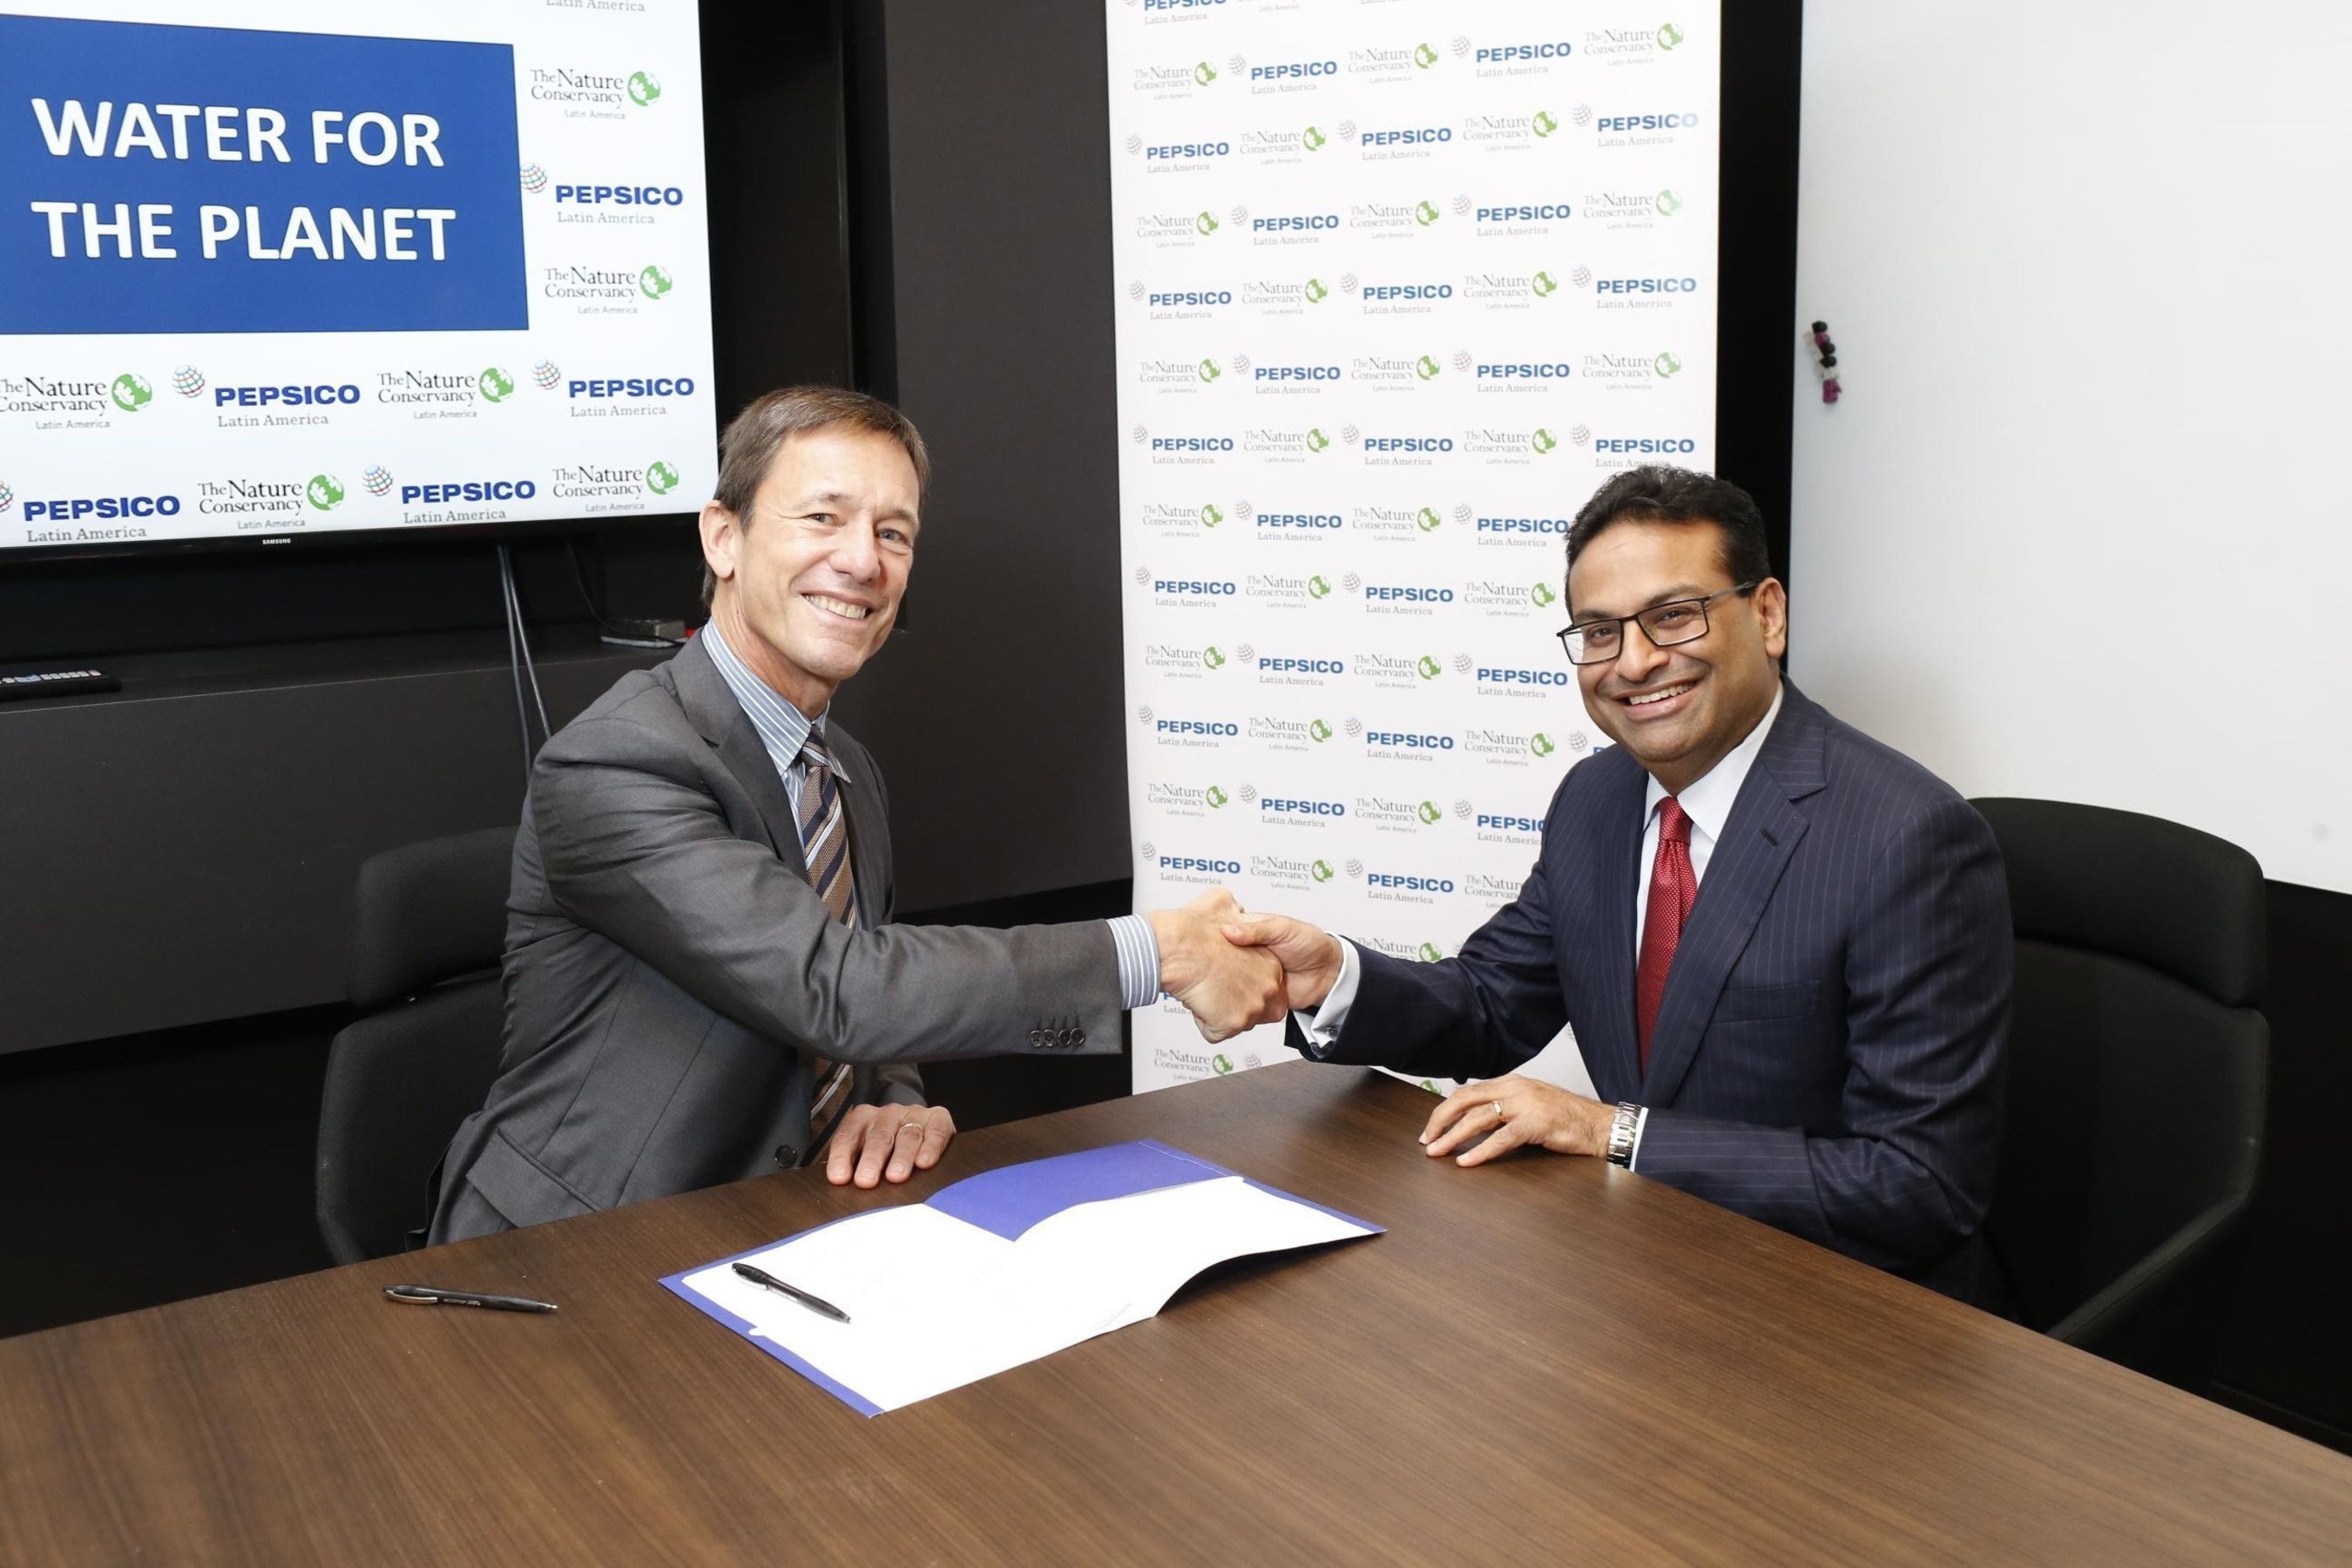 PepsiCo Latin America CEO Laxman Narasimhan and The Nature Conservancy President and CEO Mark Tercek announce a new collaboration for water replenishment in Latin America